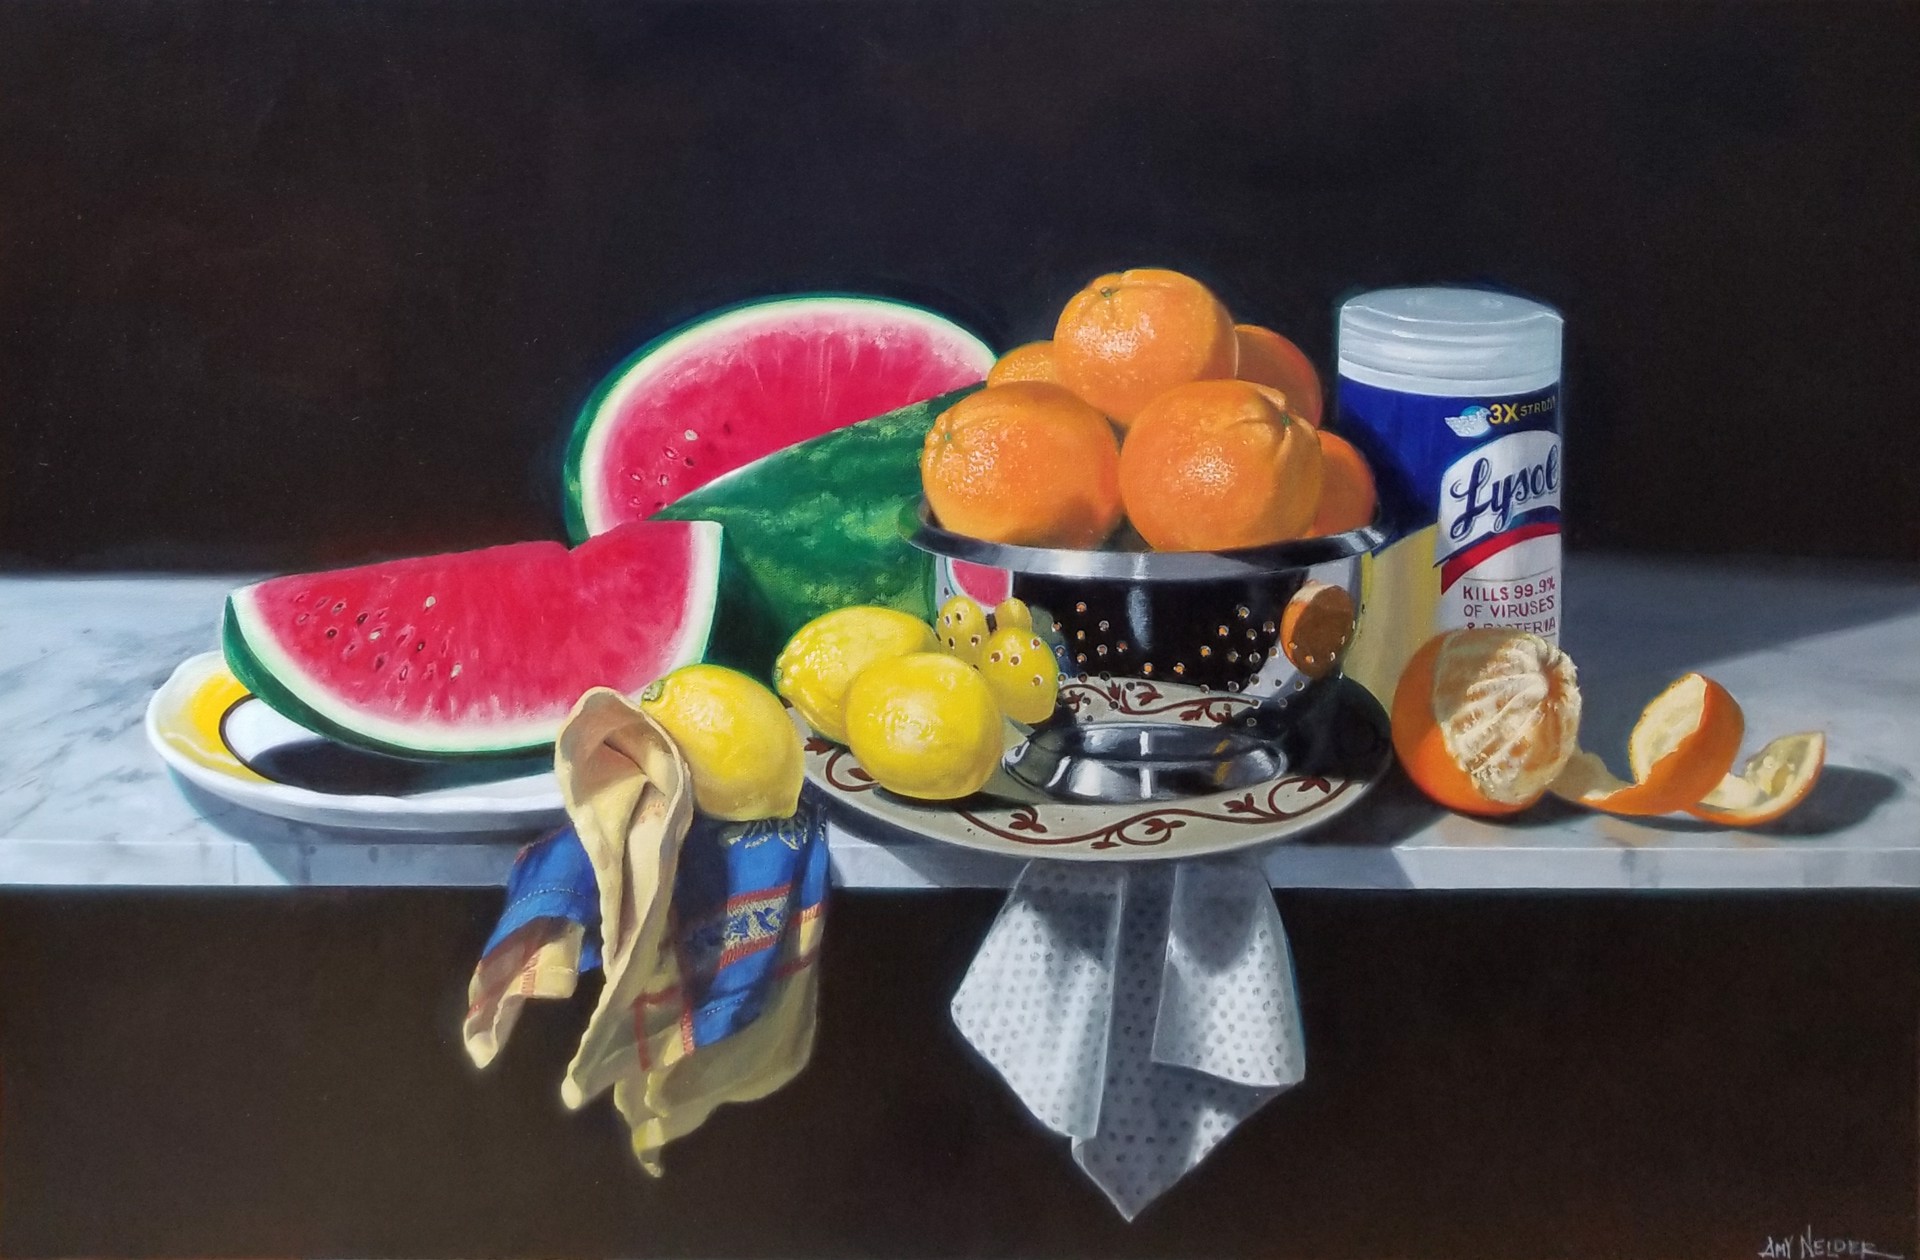 Disinfecting station (Traditional still life with watermelon, citrus, and Lysol) by Amy Nelder